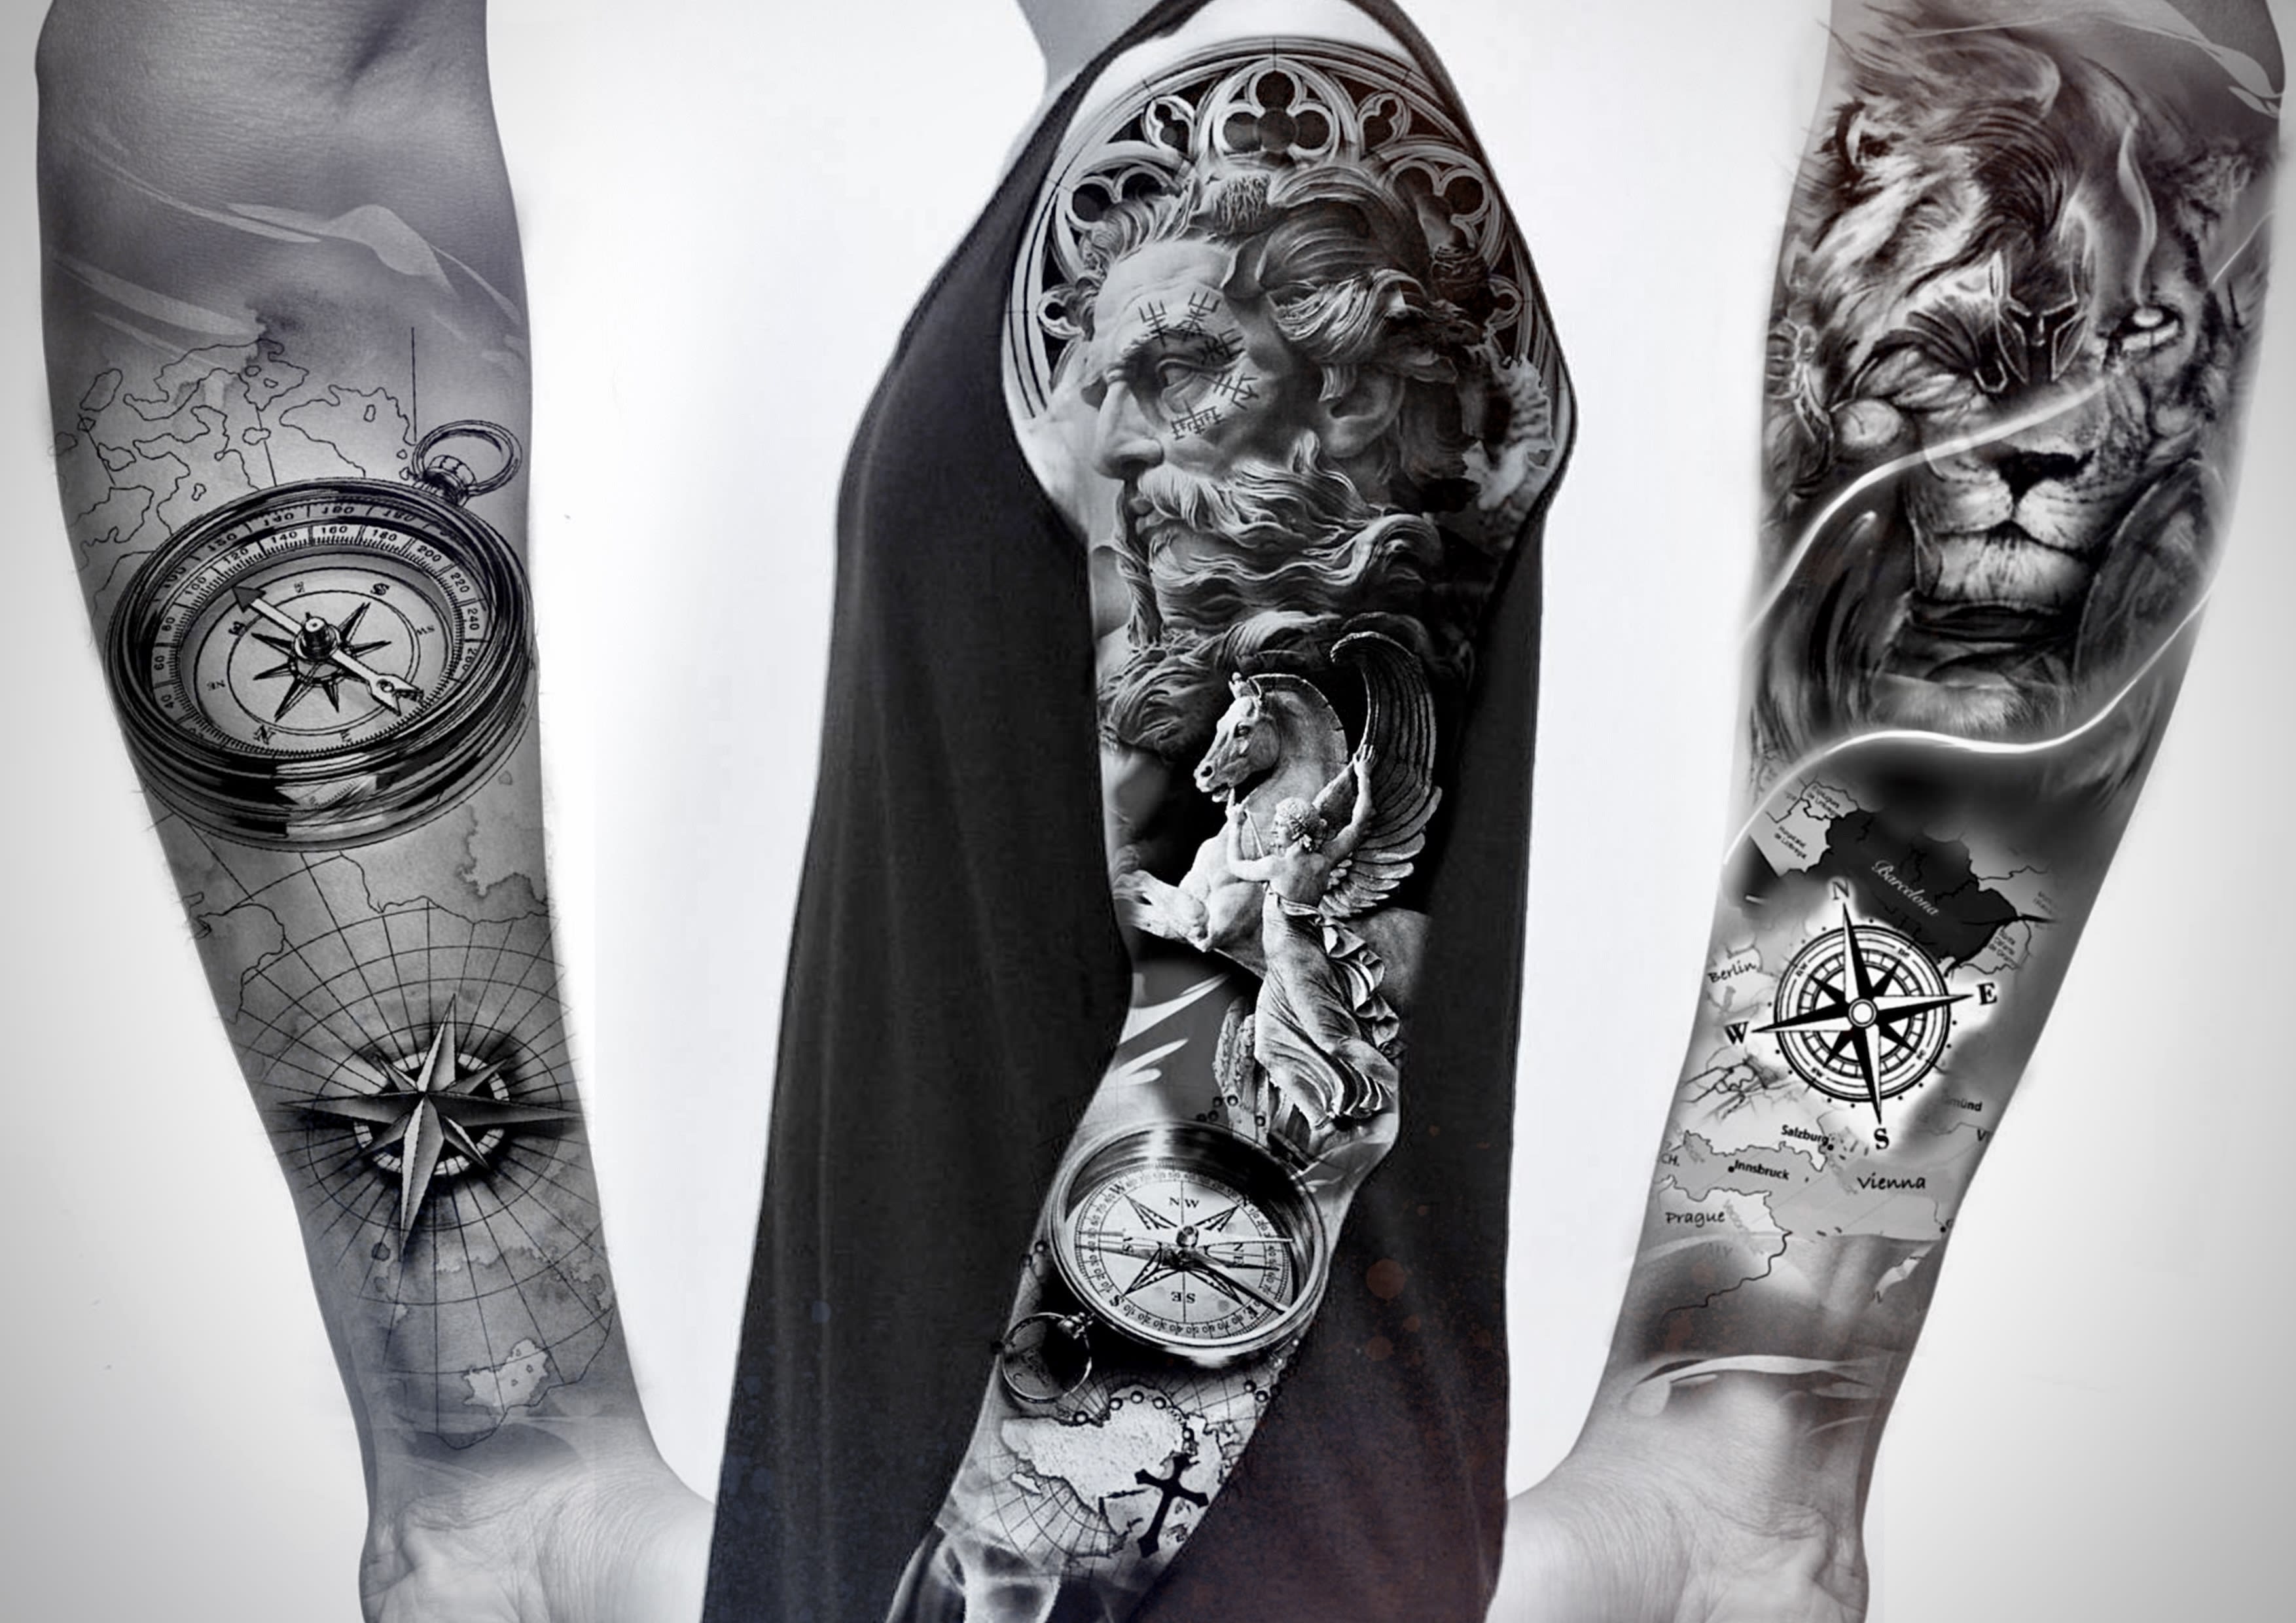 10 Free Tattoo Design Apps for Android